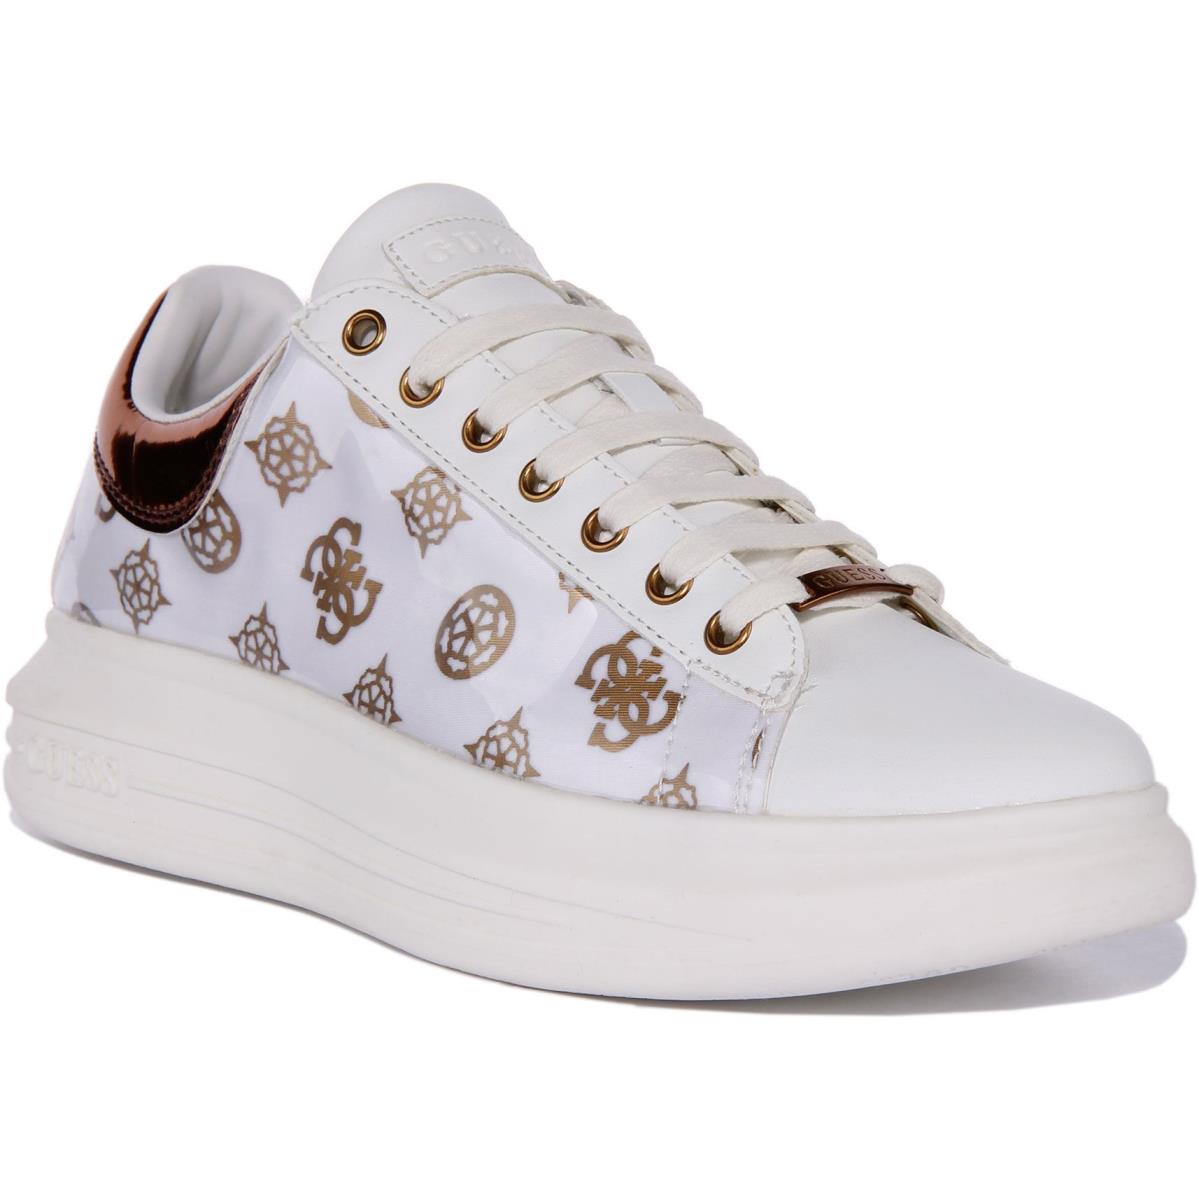 Guess Fl5Vibfab12 Vibo Womens Lace Up Sneakers In White Bronze Size US 5 - 11 WHITE BRONZE